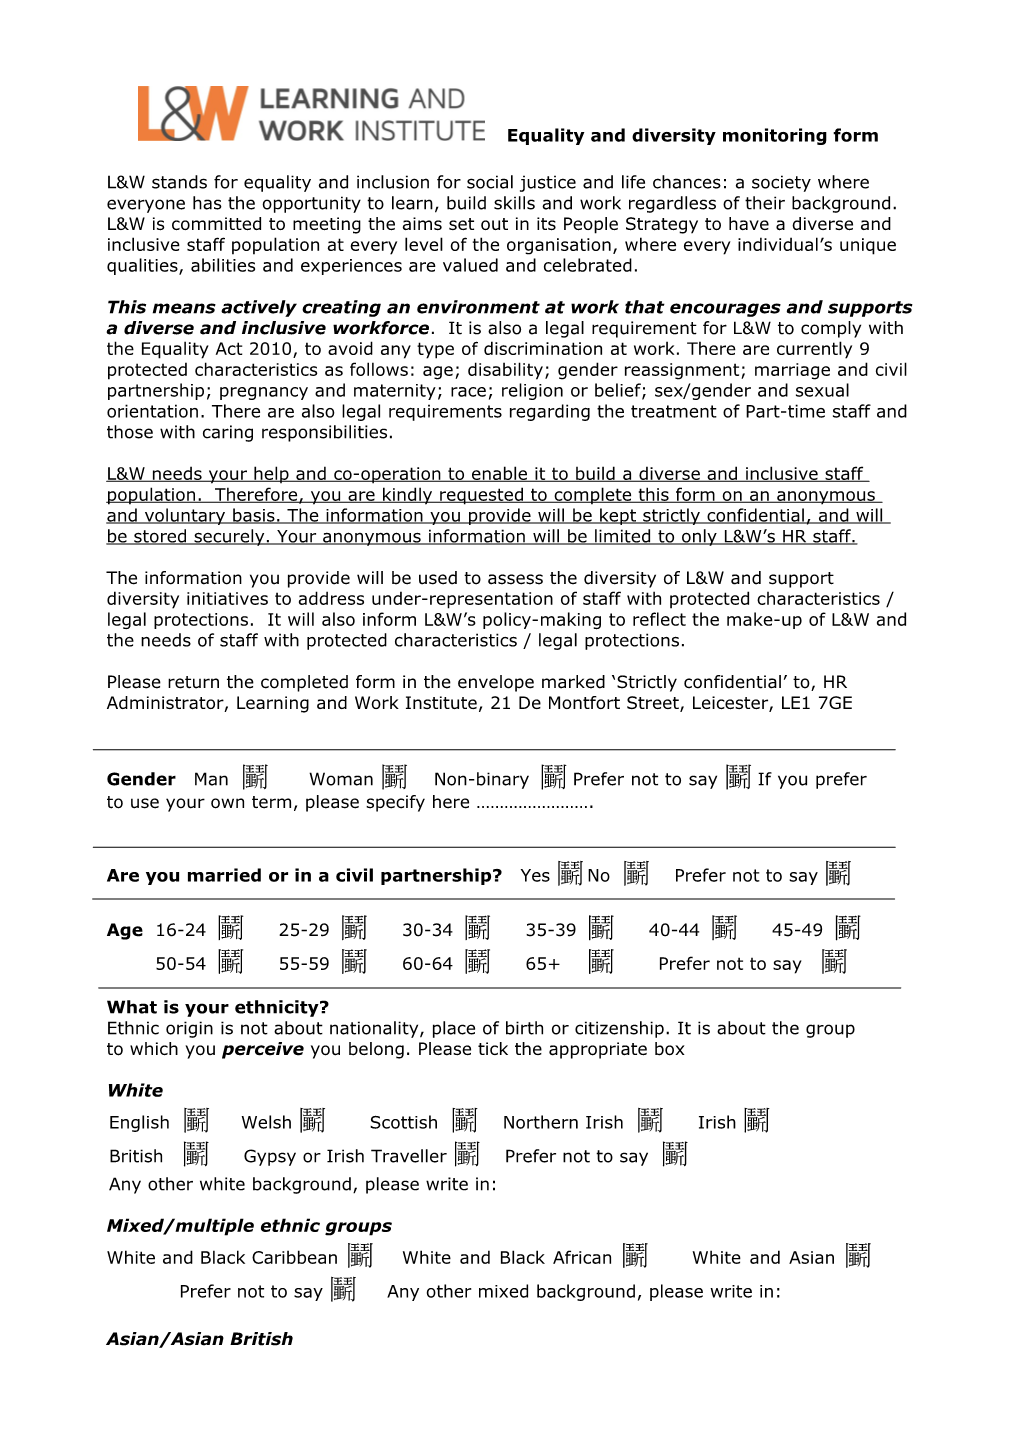 Annex a Sample Equal Opportunities Monitoring Form s3